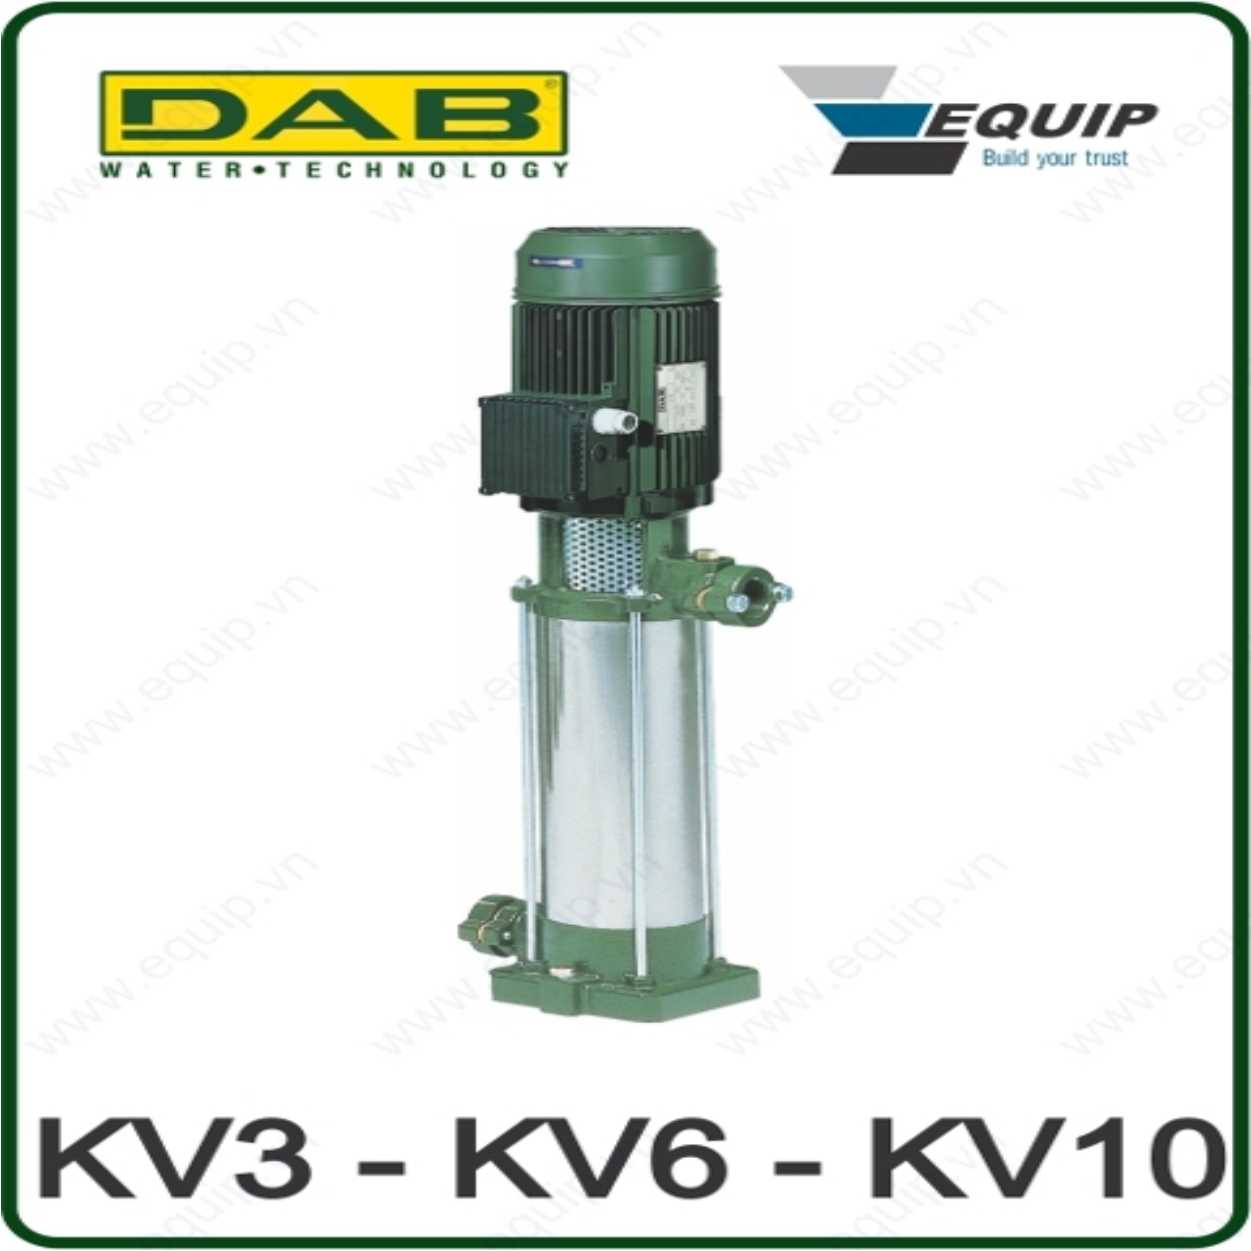 Conditioning pumps for commercial building service